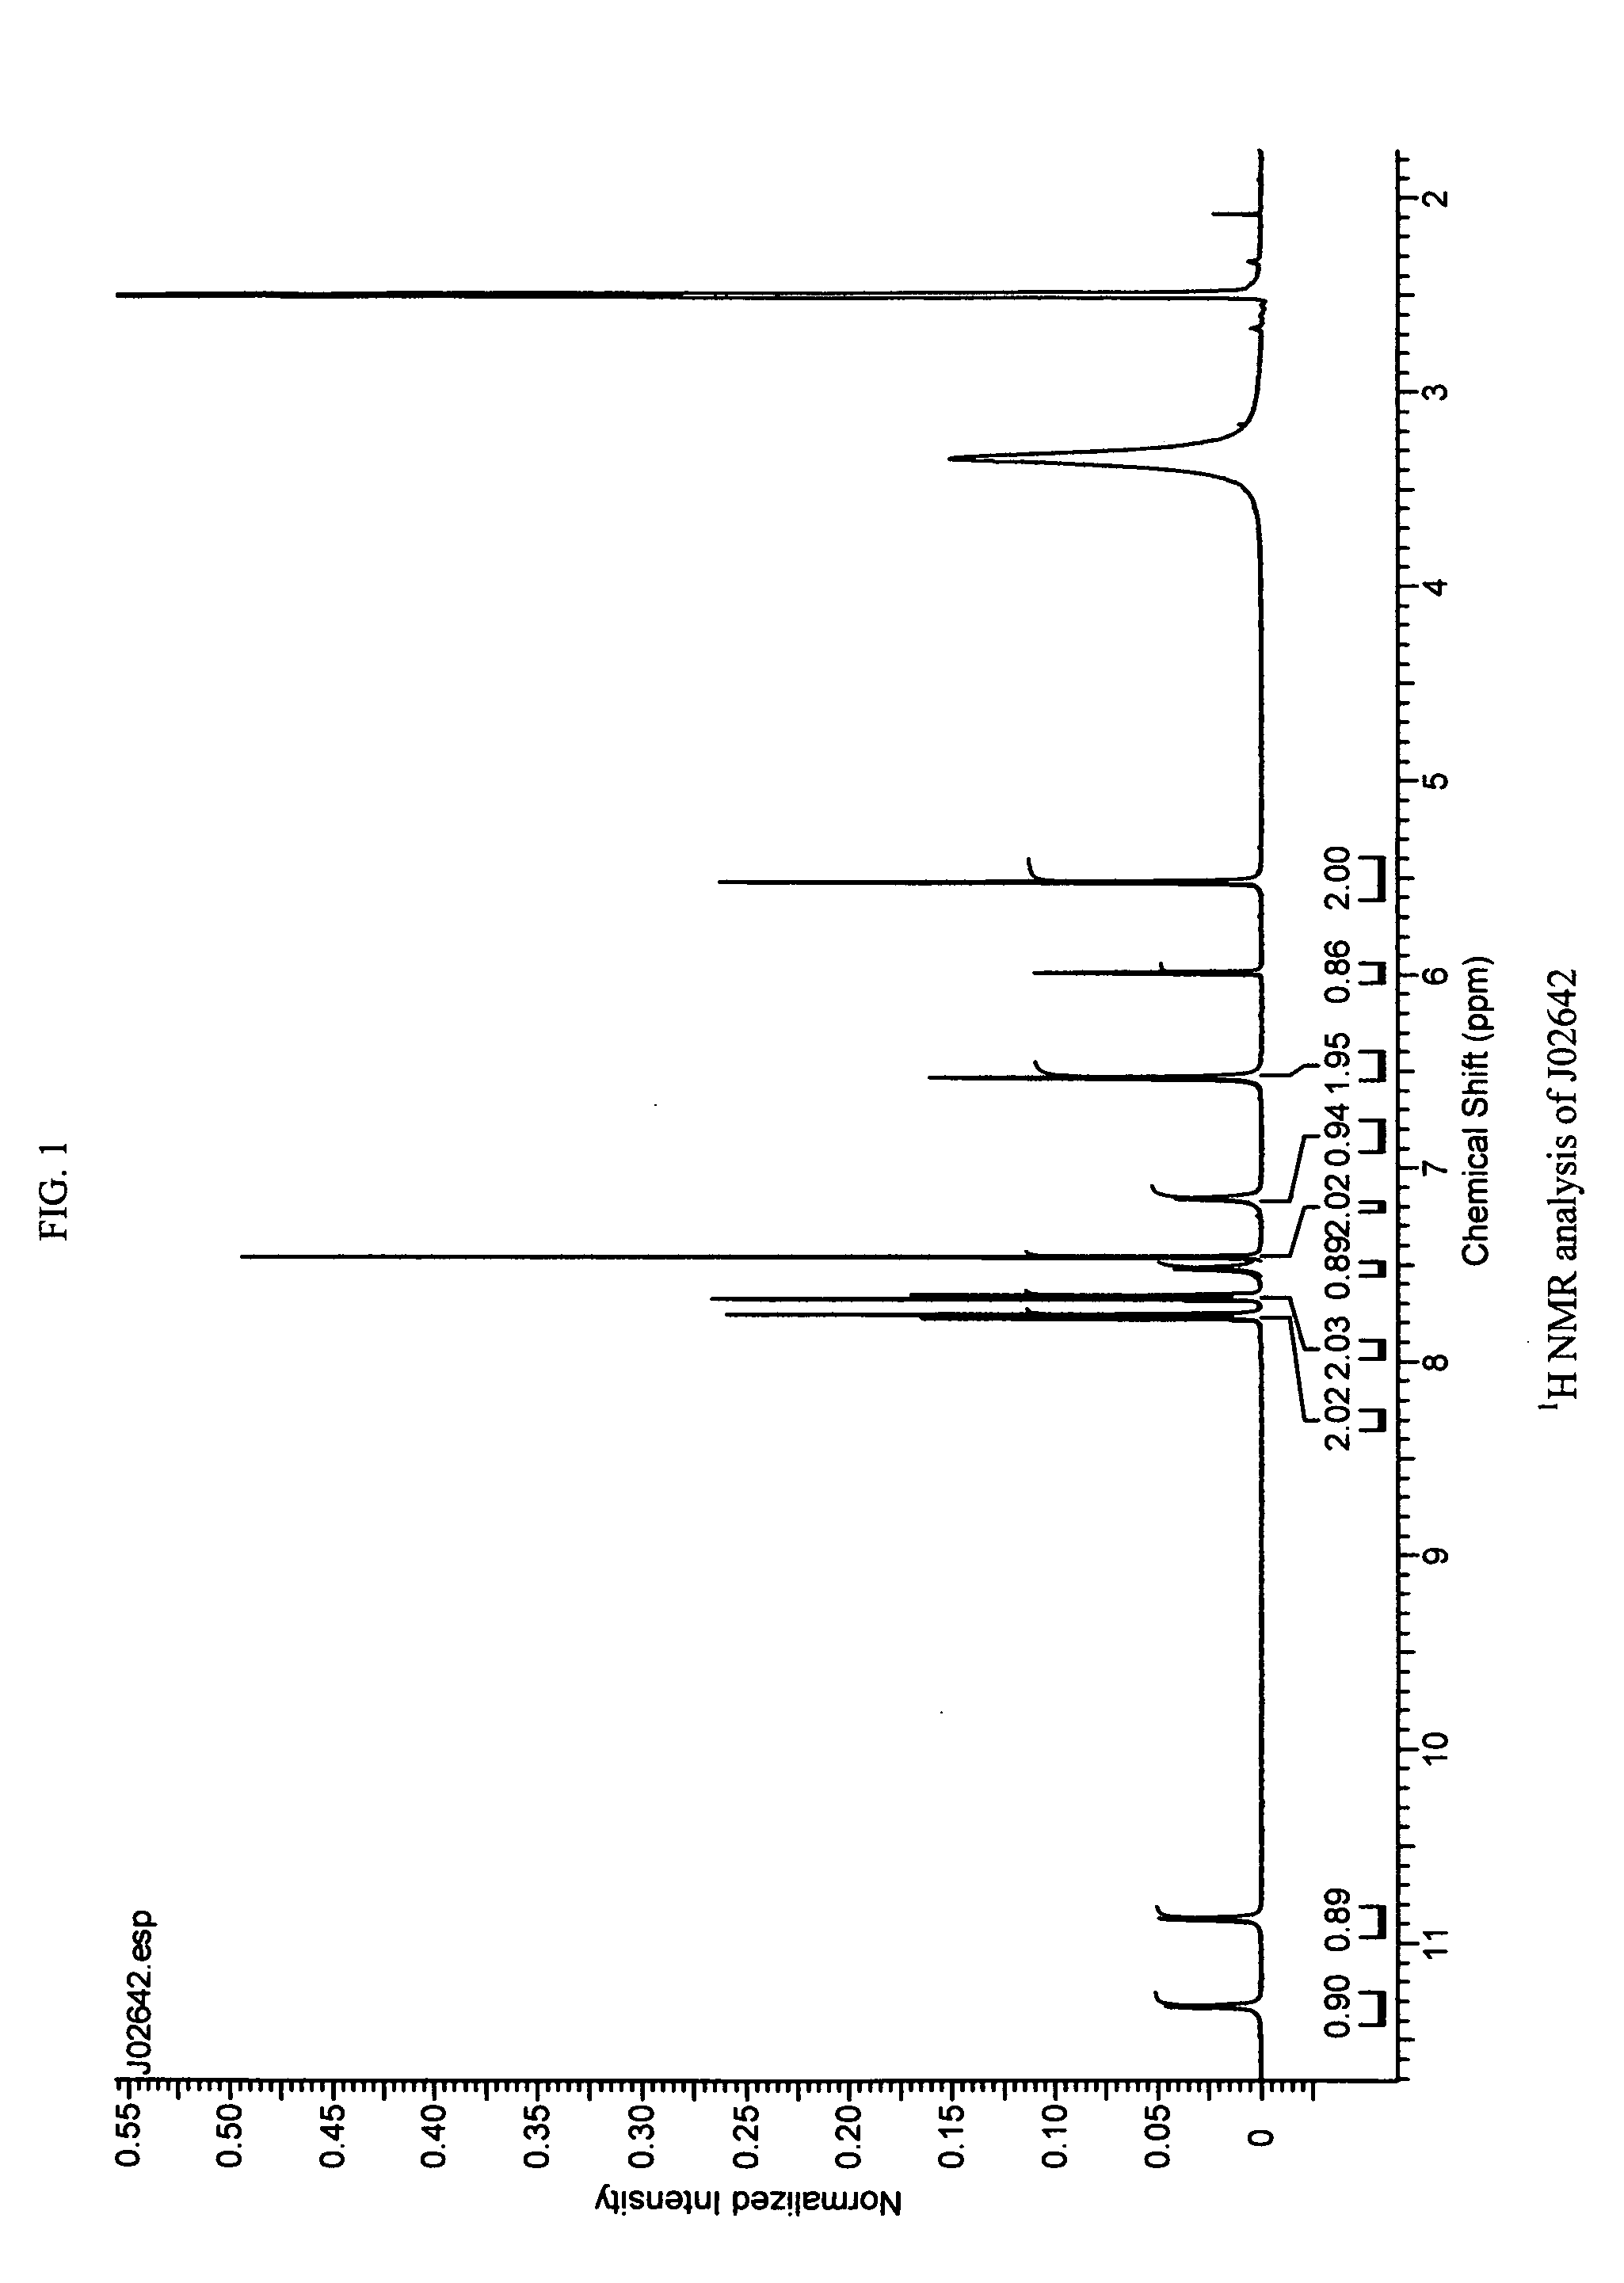 Novel compositions and processes for preparing 5-amino or substituted amino 1,2,3-triazoles and triazole orotate formulations